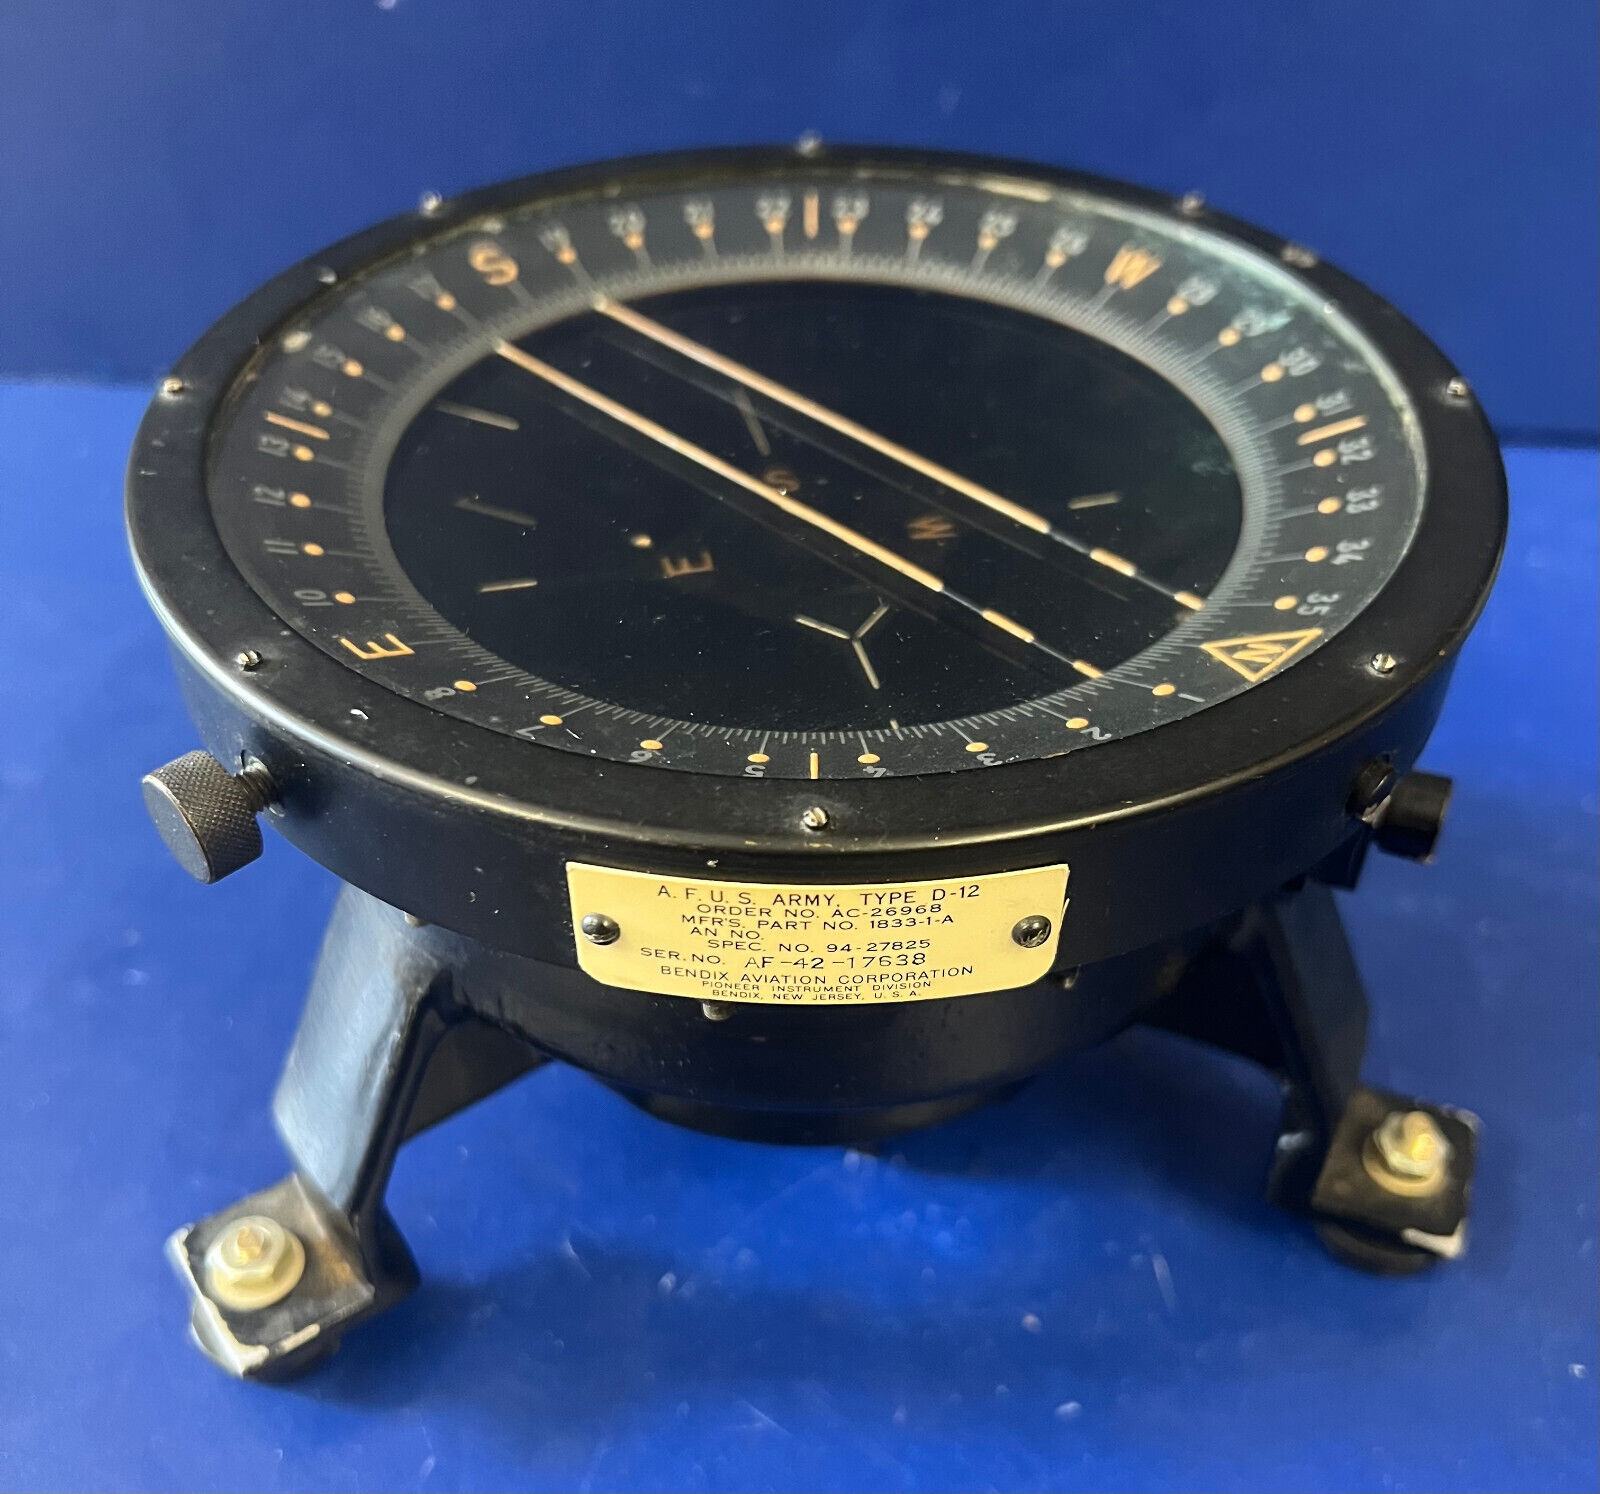 USAAF B-17 FLYING FORTRESS TYPE D-12 MASTER NAVIGATION COMPASS